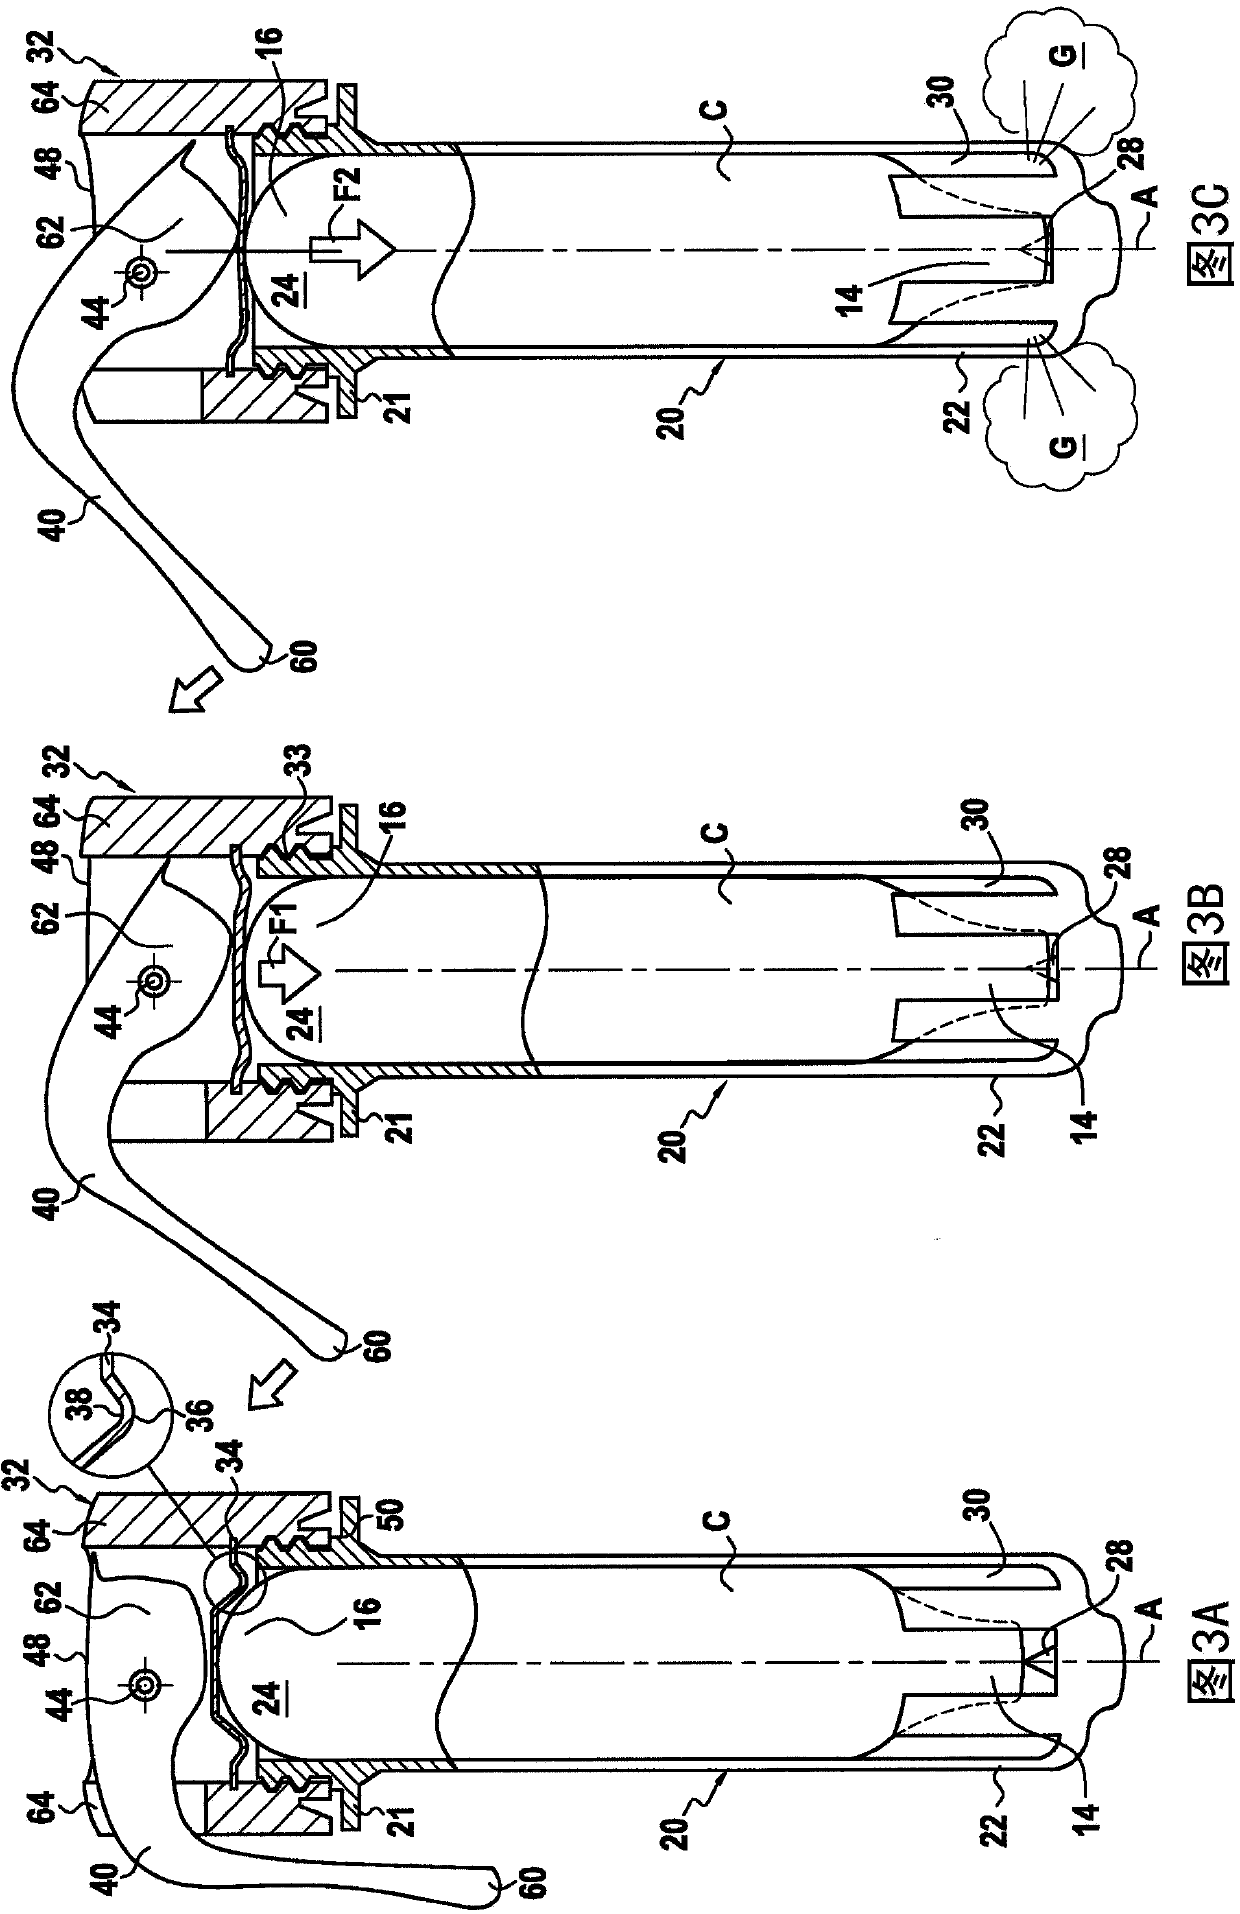 Device for aiding inflation of an inflatable item